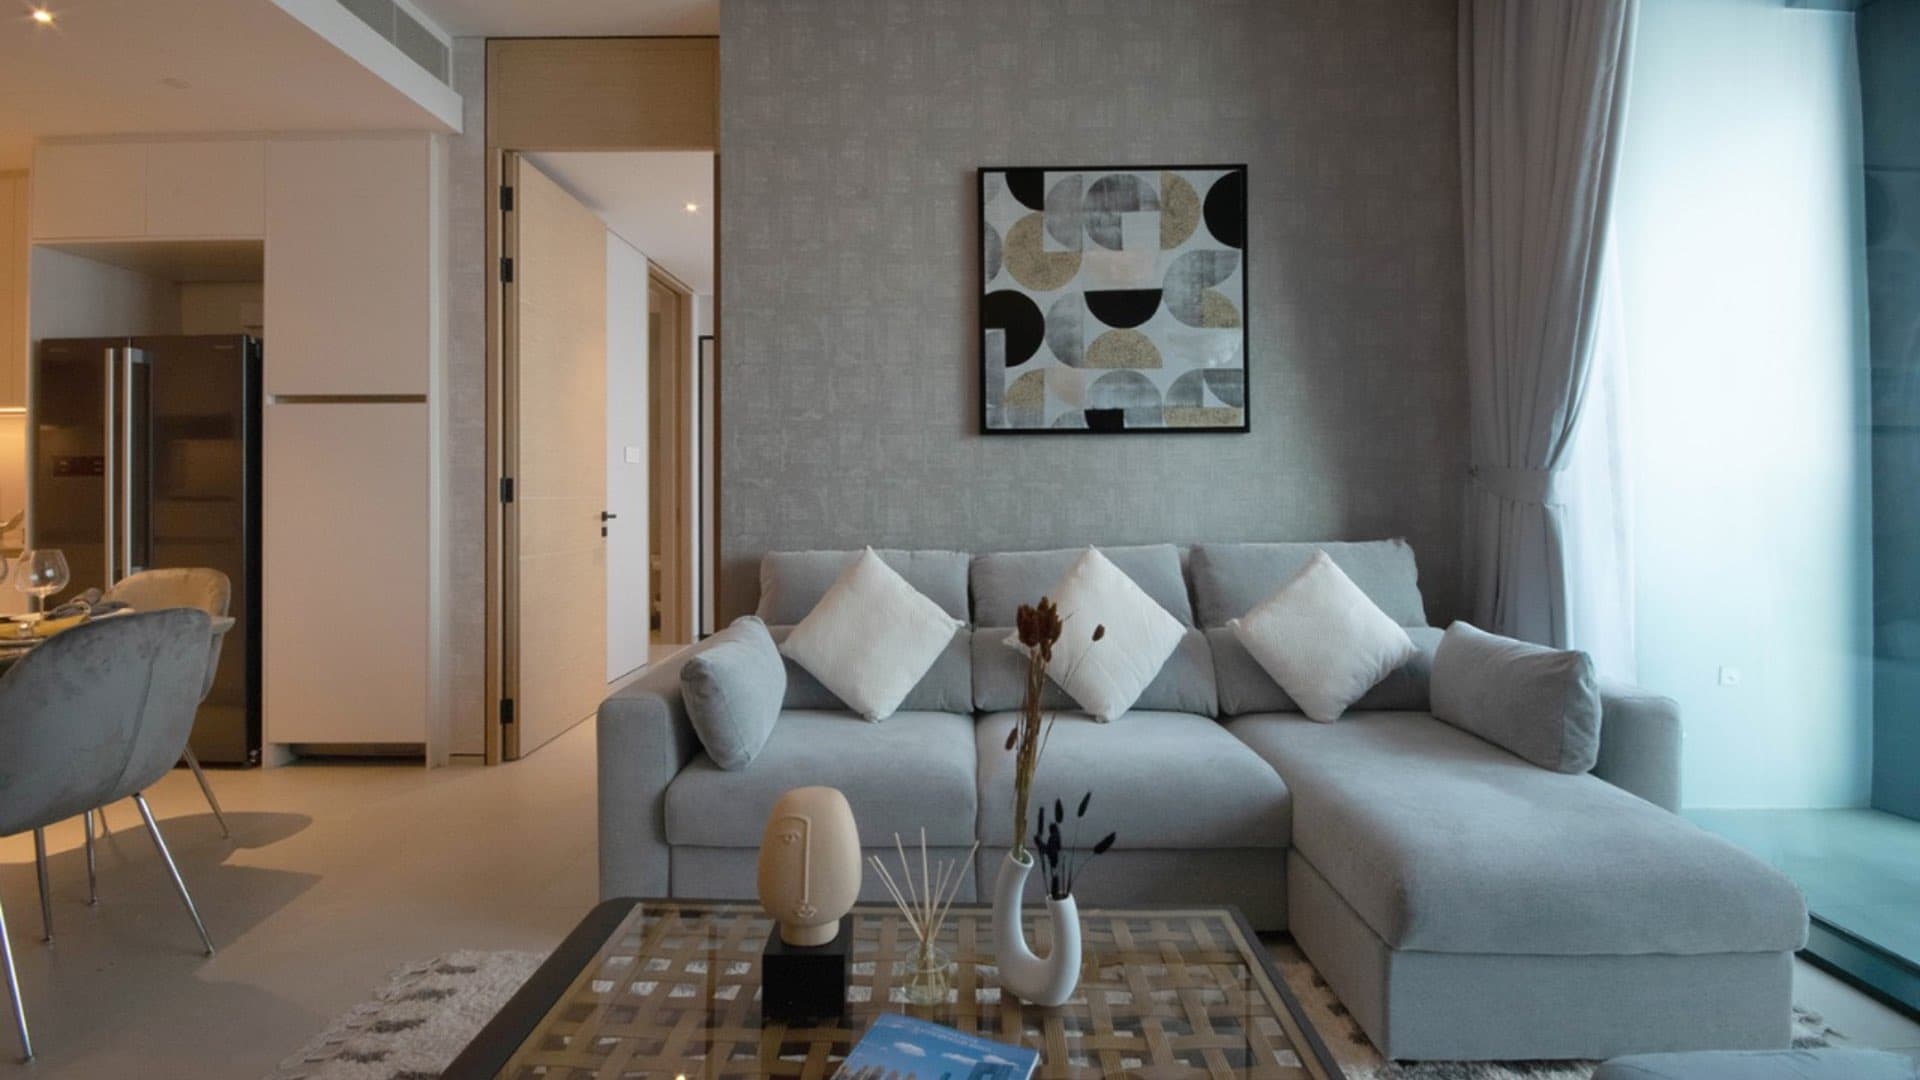 2 Bedroom Apartment For Sale The Address Jumeirah Resort And Spa Lp12214 1e076b80ac43f800.jpg